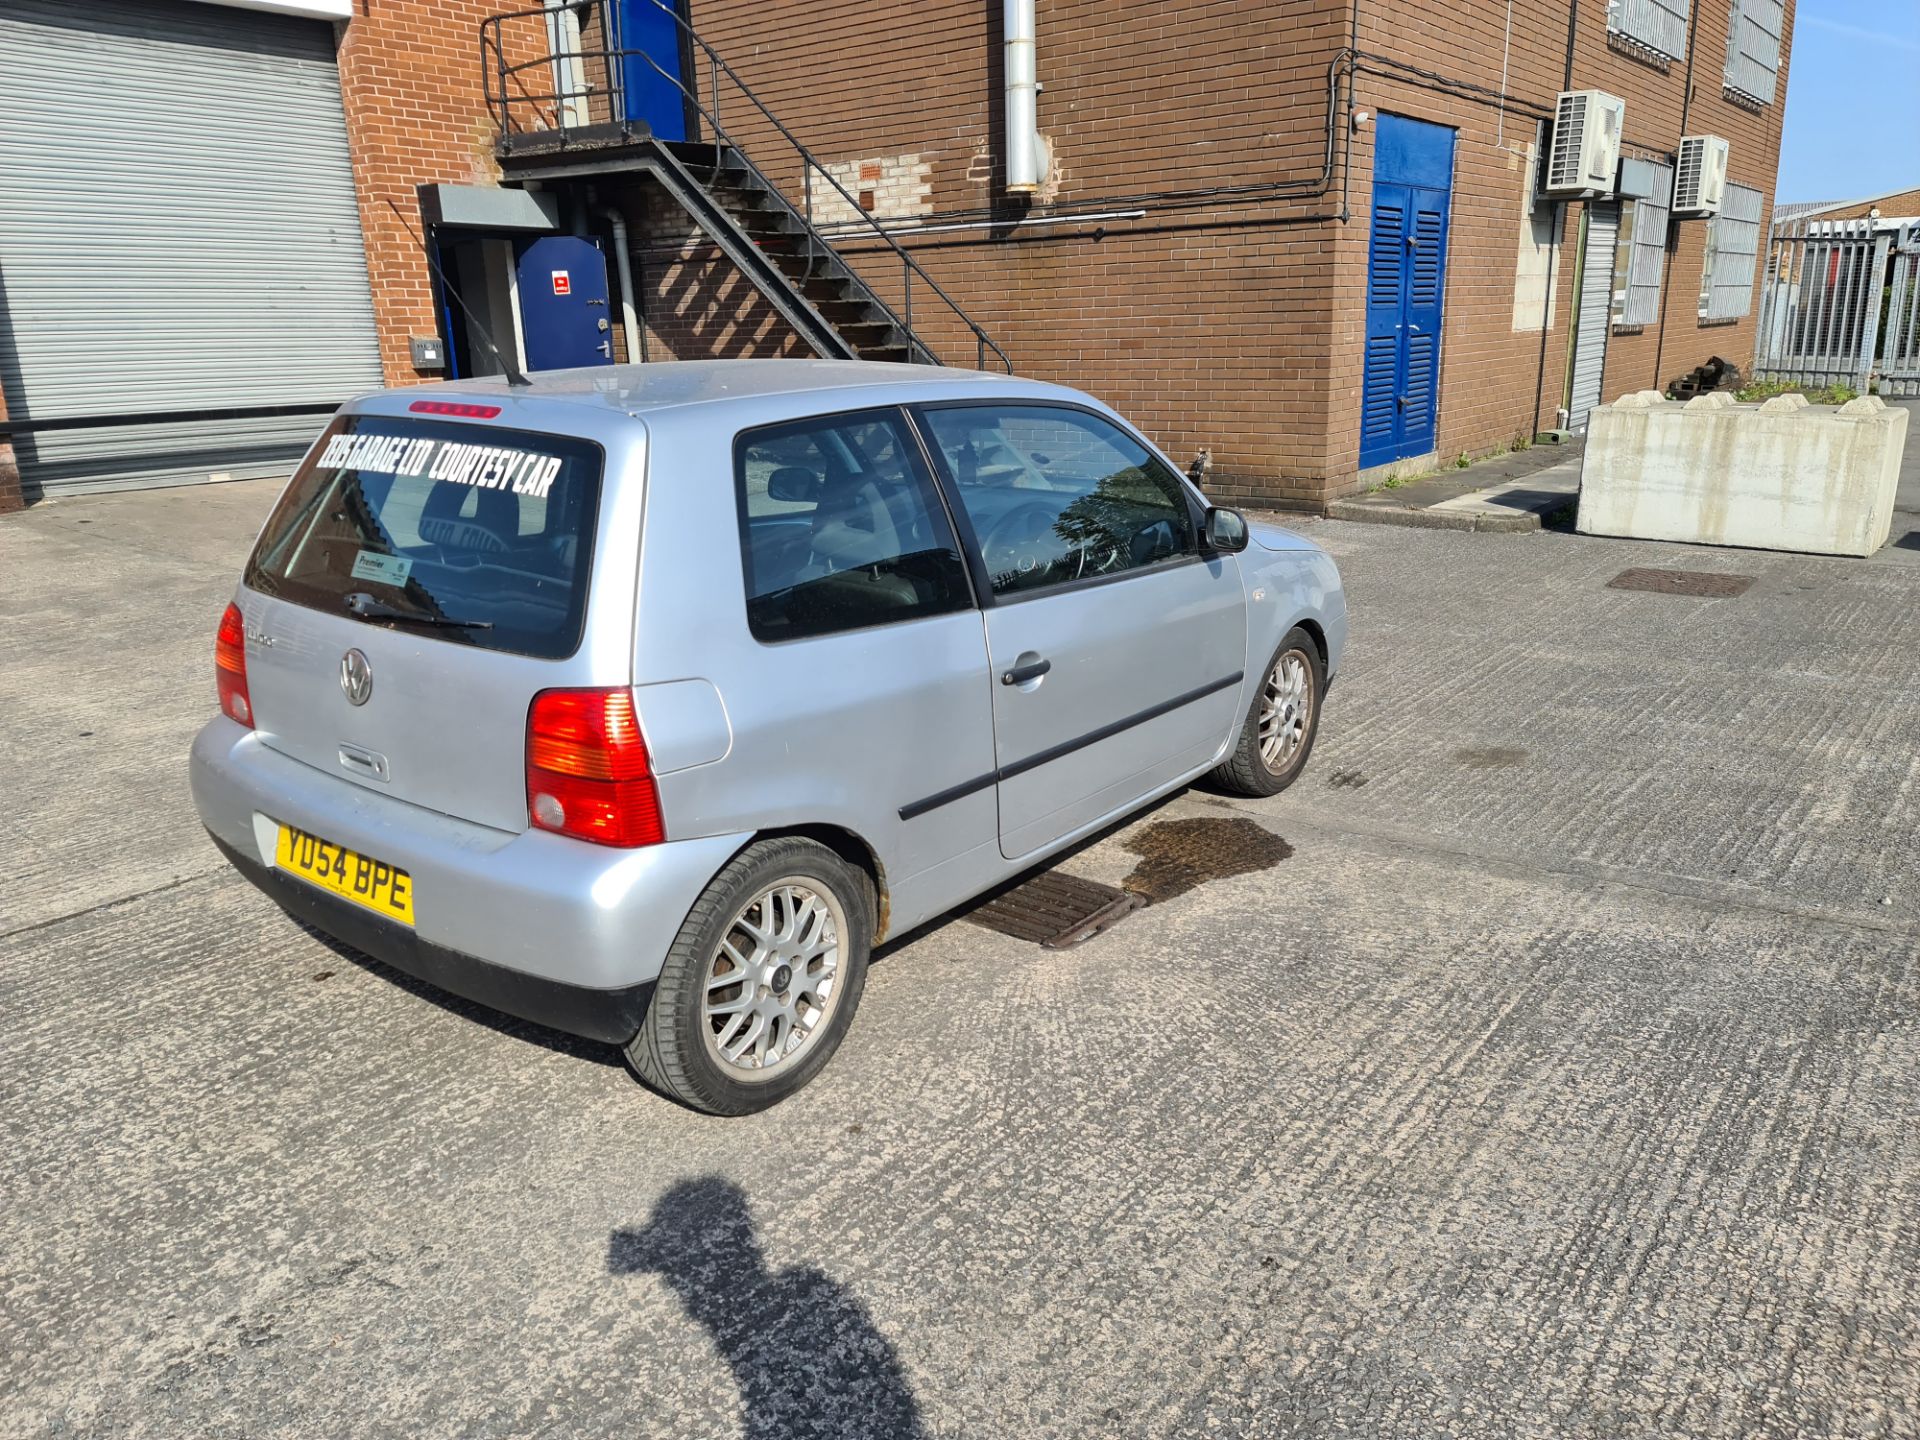 YD54 BPE Volkswagen Lupo E 3 door hatchback car, 5 speed manual gearbox, 999cc petrol engine. Colou - Image 3 of 40